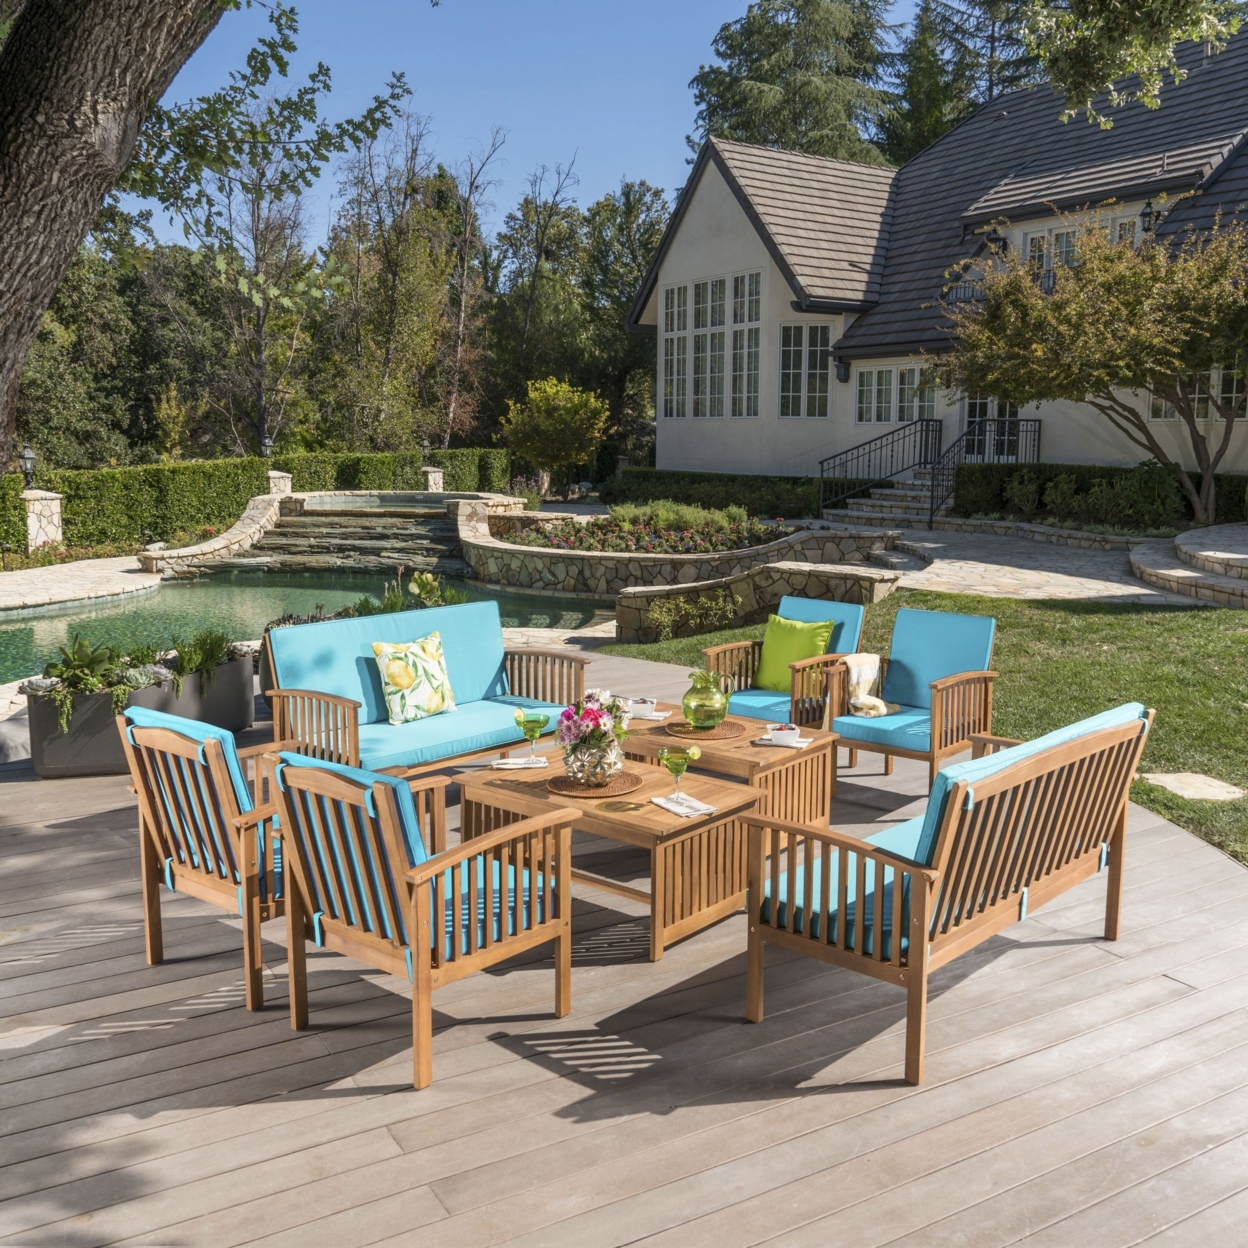 Cape Town Outdoor 8 Piece Acacia Wood Sofa Set With Water Resistant Cushions - Teal